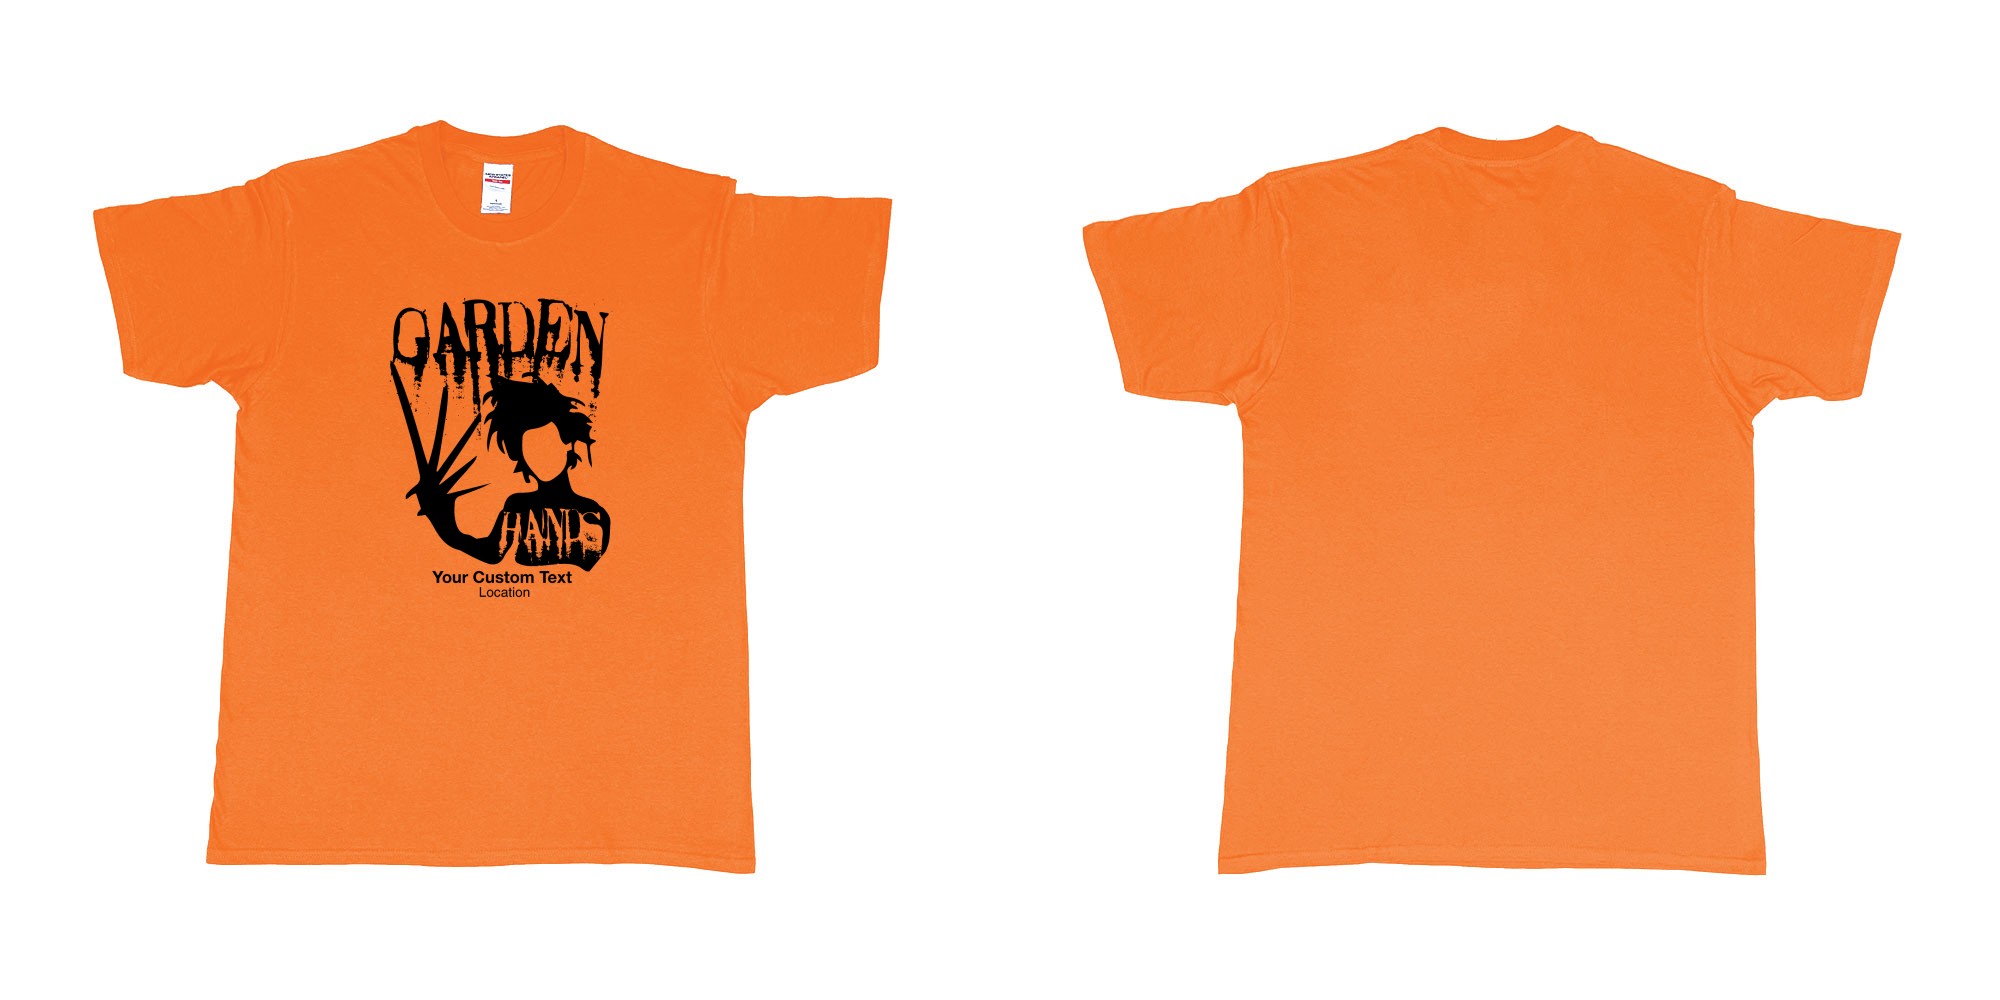 Custom tshirt design garden hands edward scissorhands custom design in fabric color orange choice your own text made in Bali by The Pirate Way